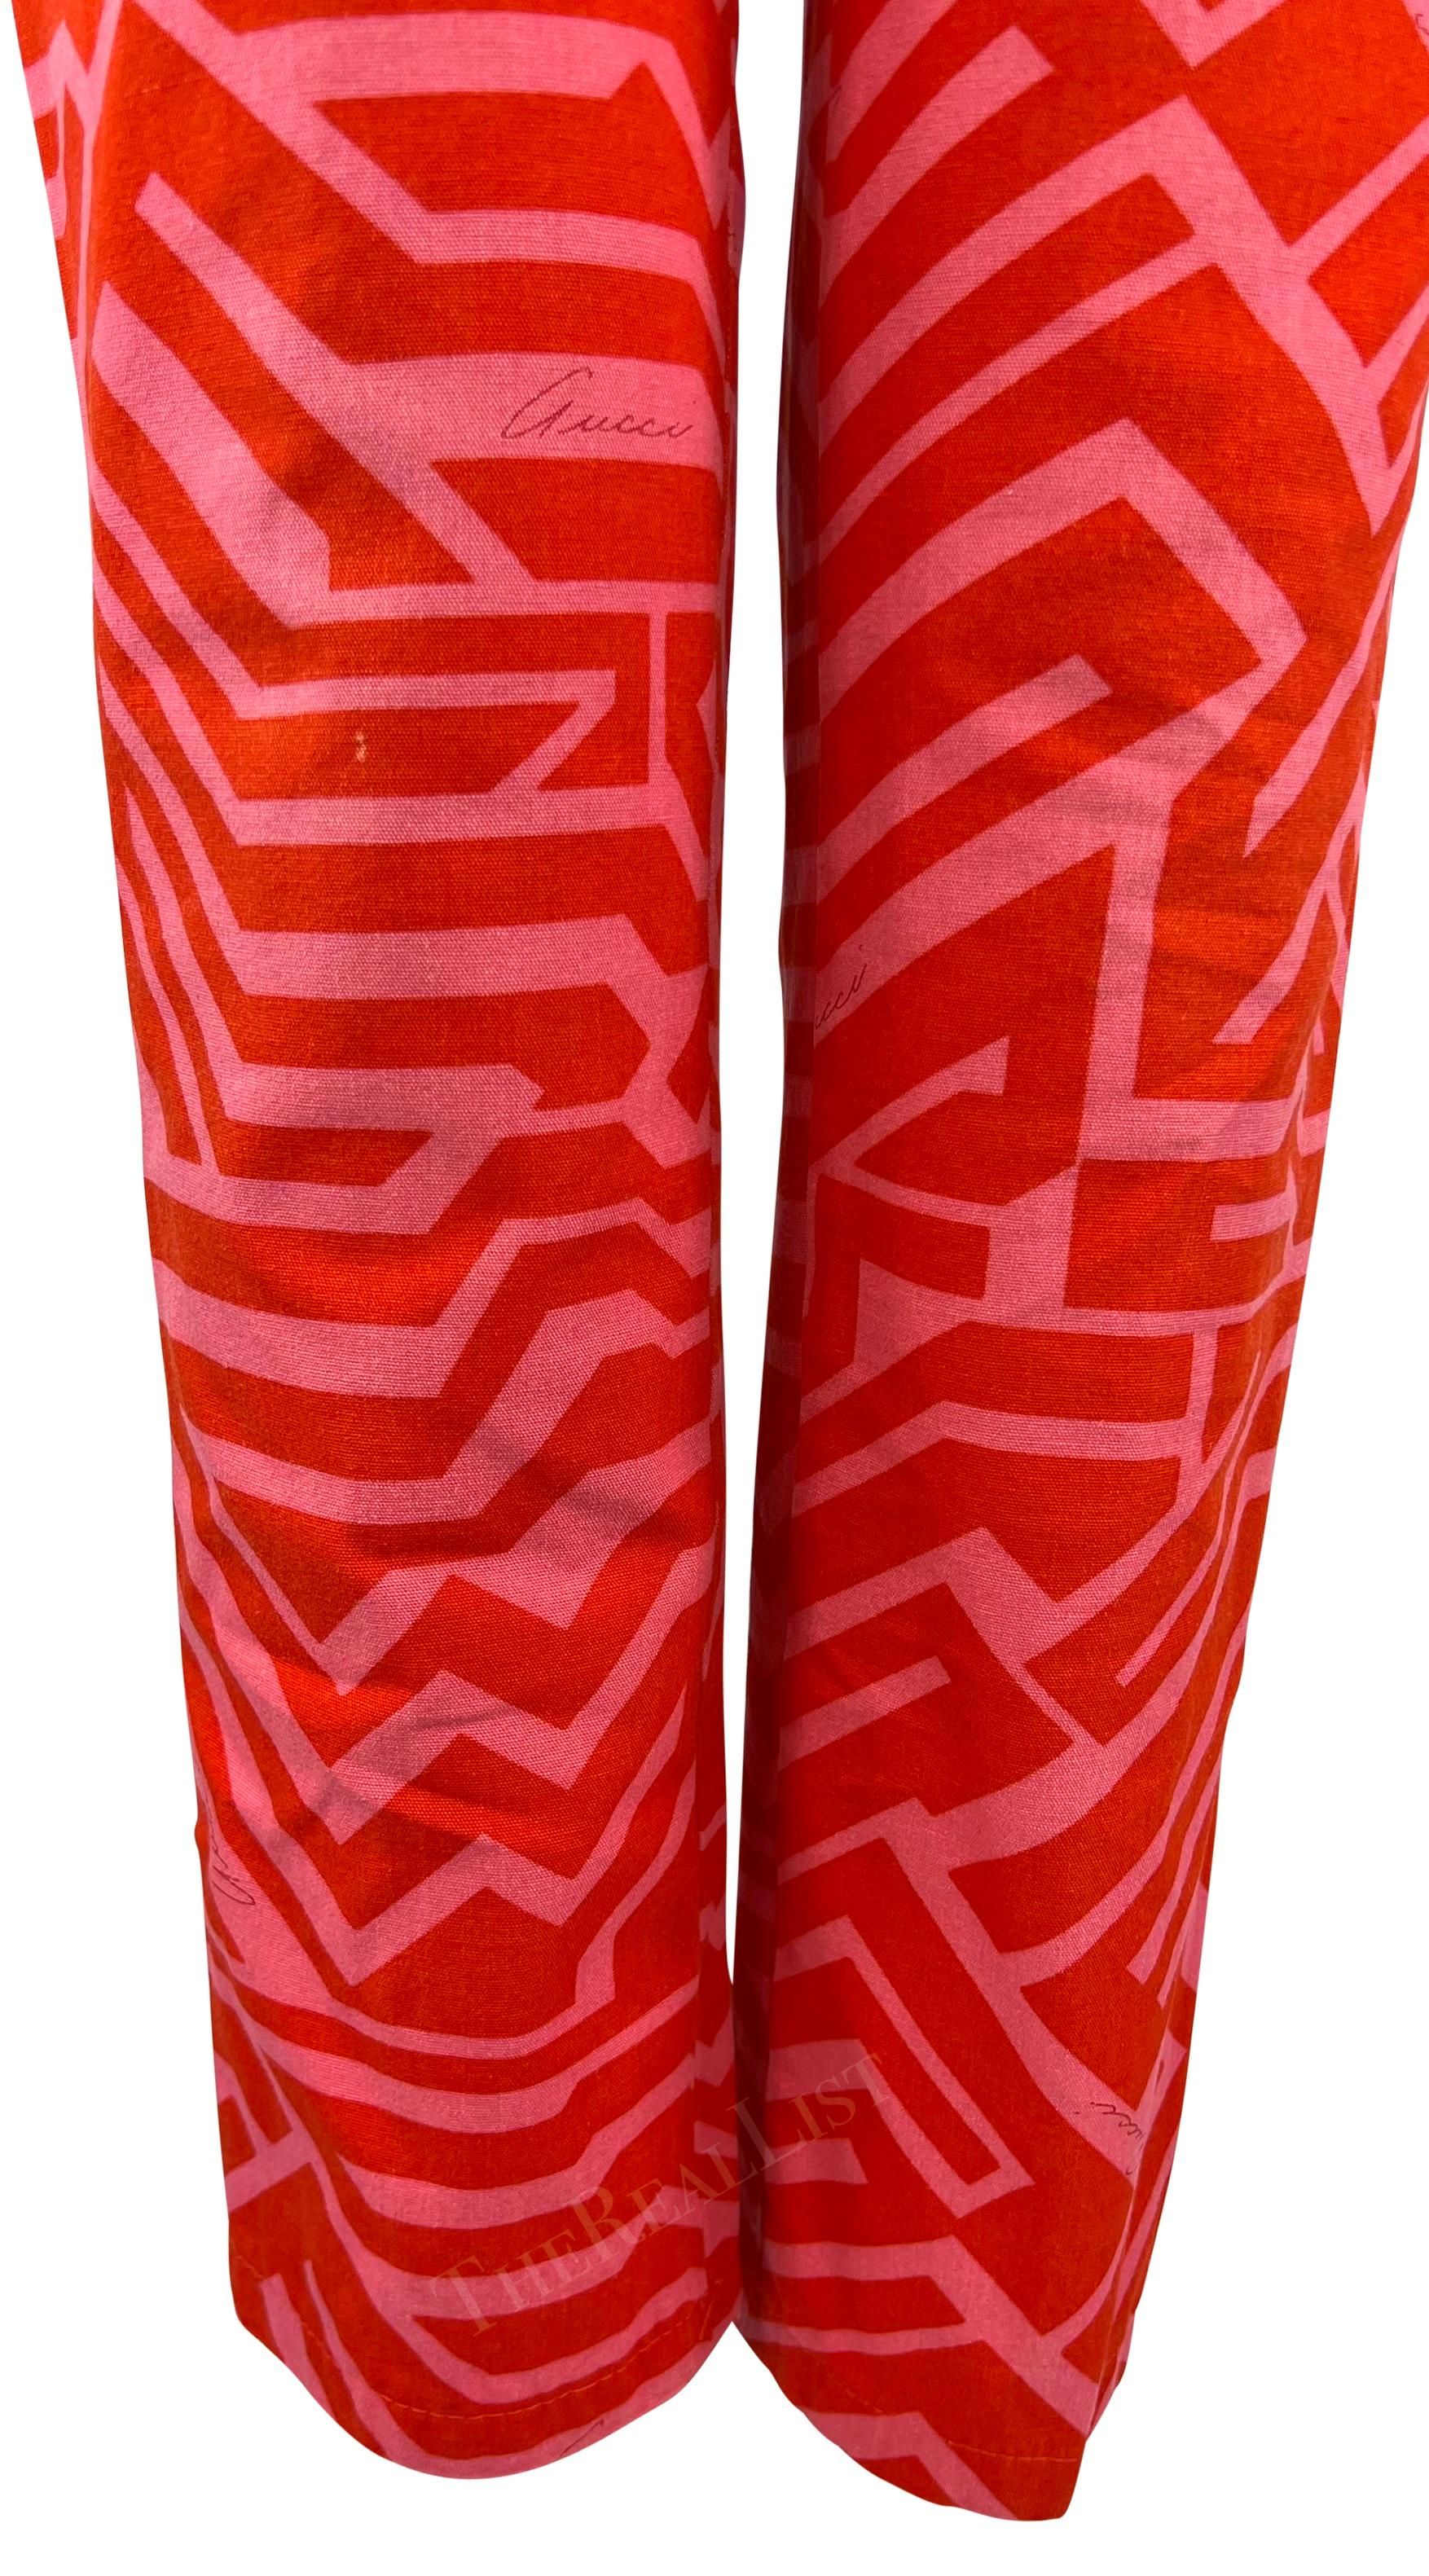 S/S 1996 Gucci by Tom Ford Pink Red Geometric Logo Print Cotton Pants For Sale 5